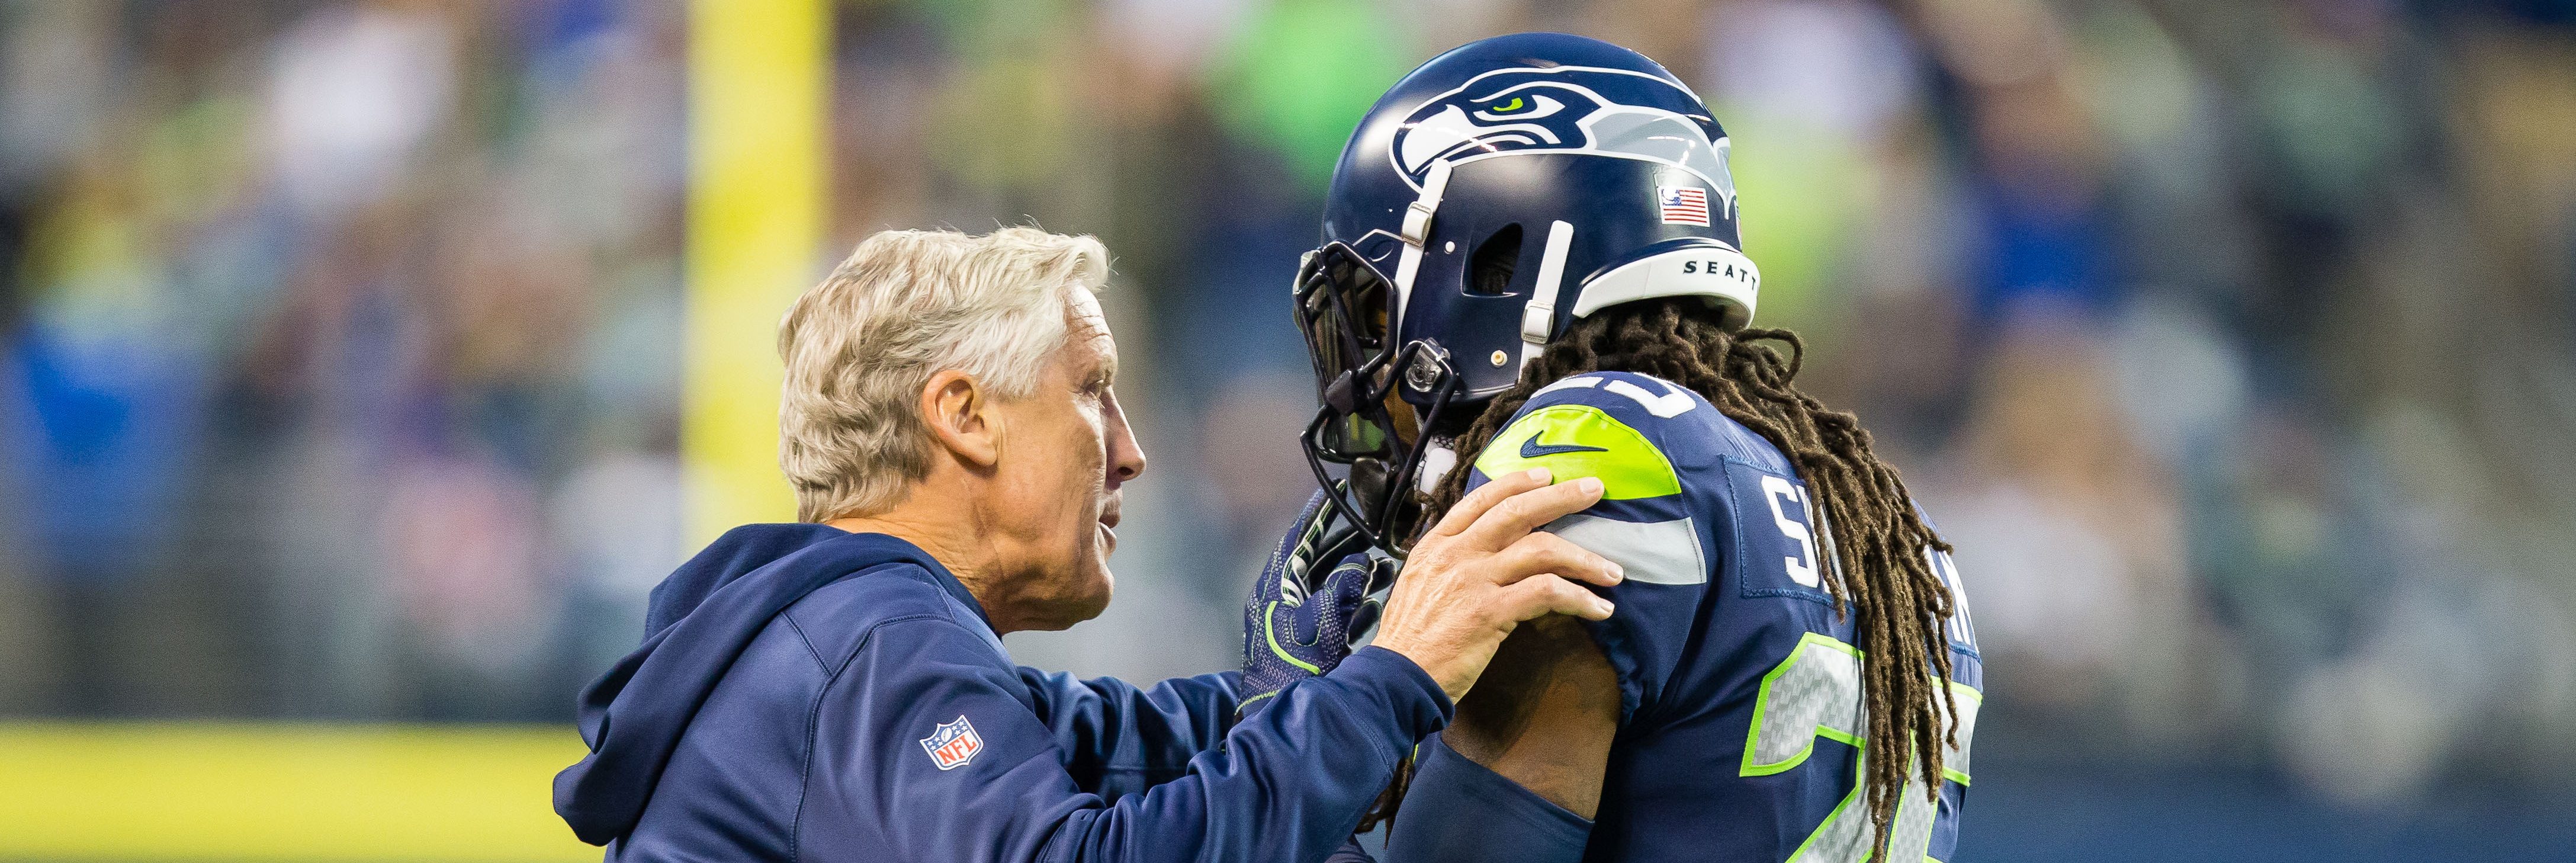 Head coach Pete Carroll talks to Richard Sherman (25) of the Seattle Seahawks during a game between the Seattle Seahawks and the Indianapolis Colts on October 01, 2017. (Photo by Christopher Mast/Icon Sportswire via Getty Images)